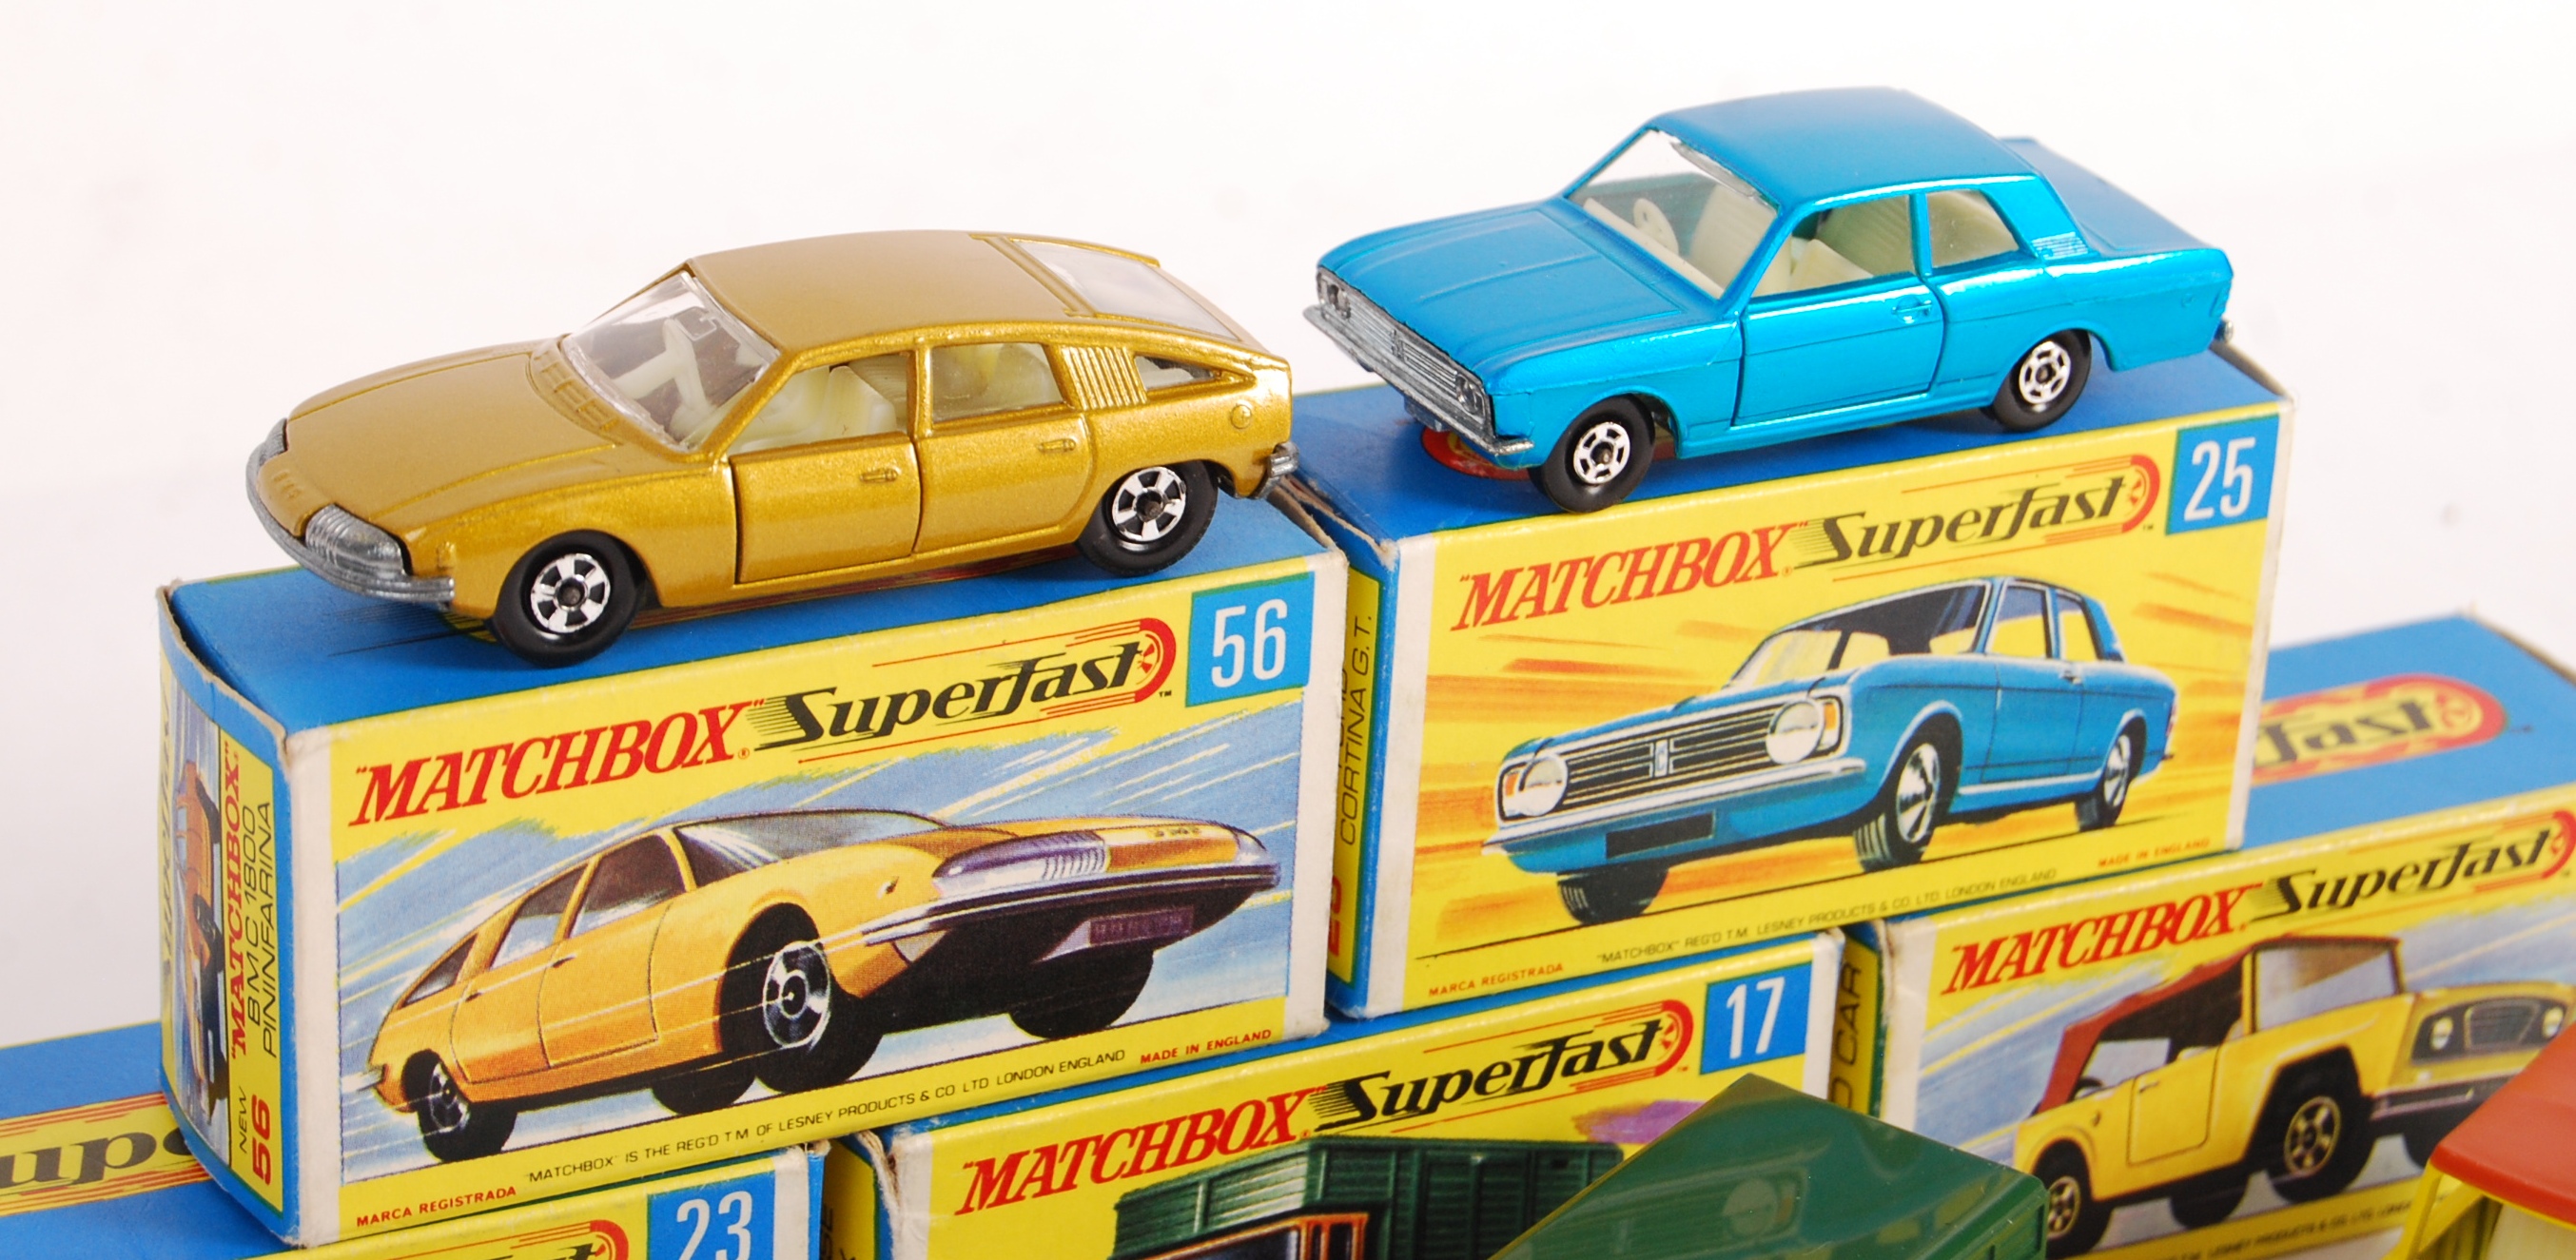 RARE MINT+ MATCHBOX SUPERFAST BOXED DIECAST MODELS - Image 4 of 6